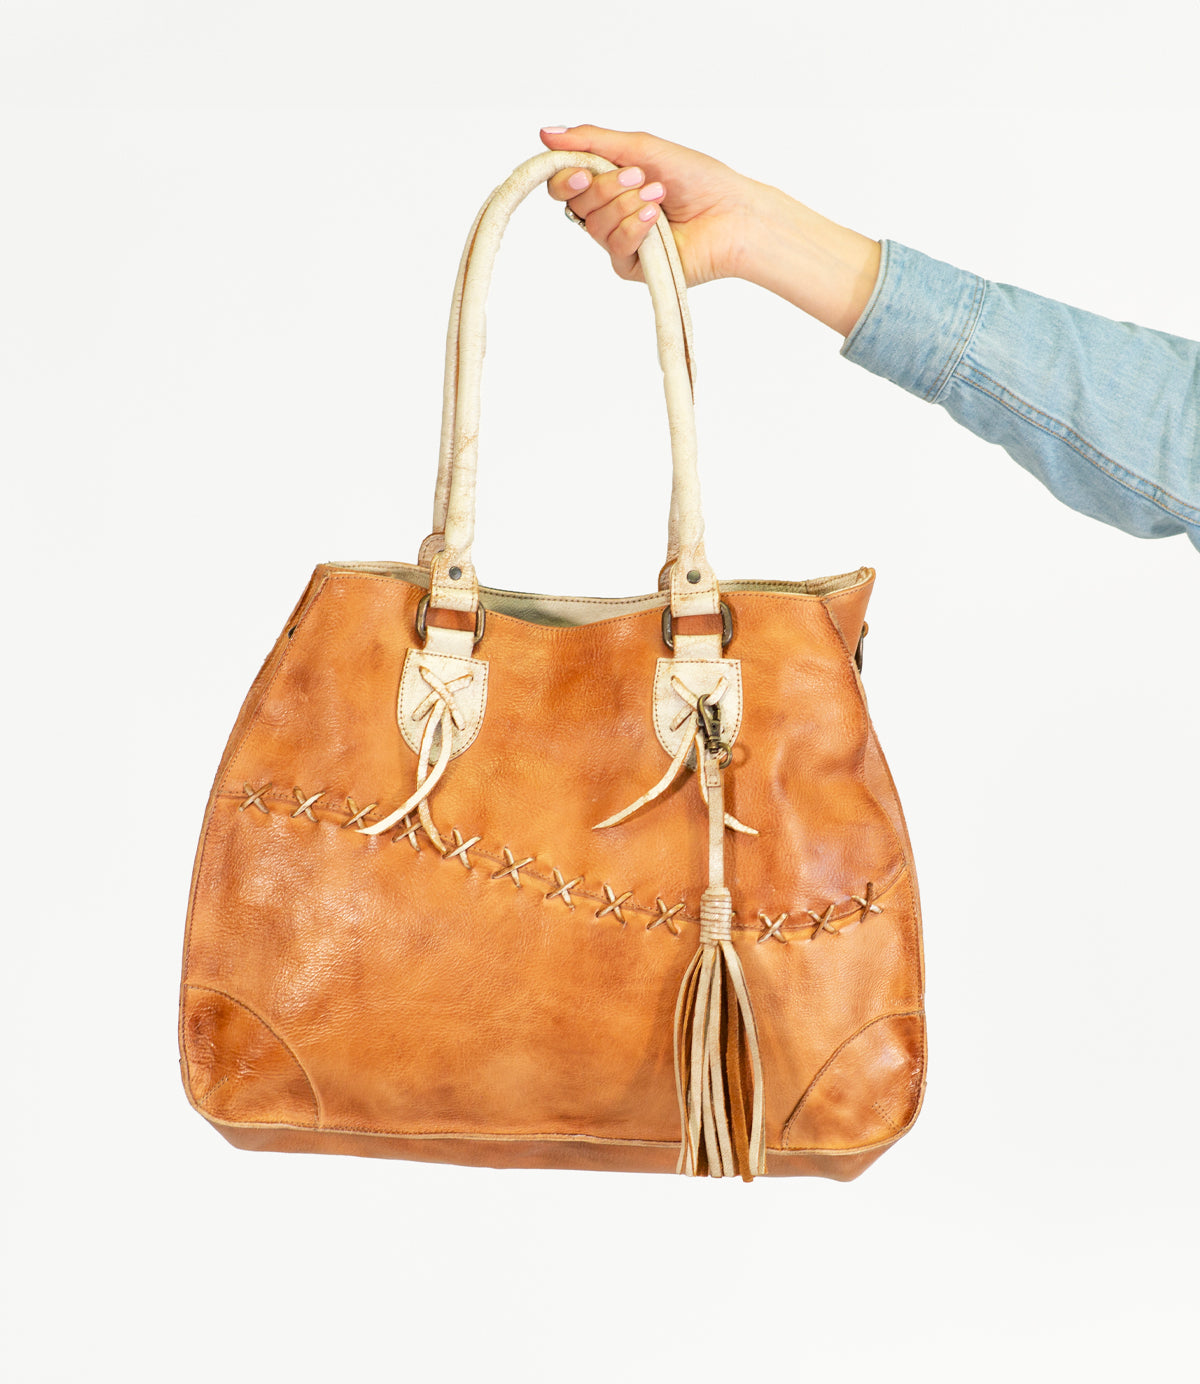 An accessory with tassels, the Bed Stu brown leather bag is being held by a hand, showcasing personal expression.